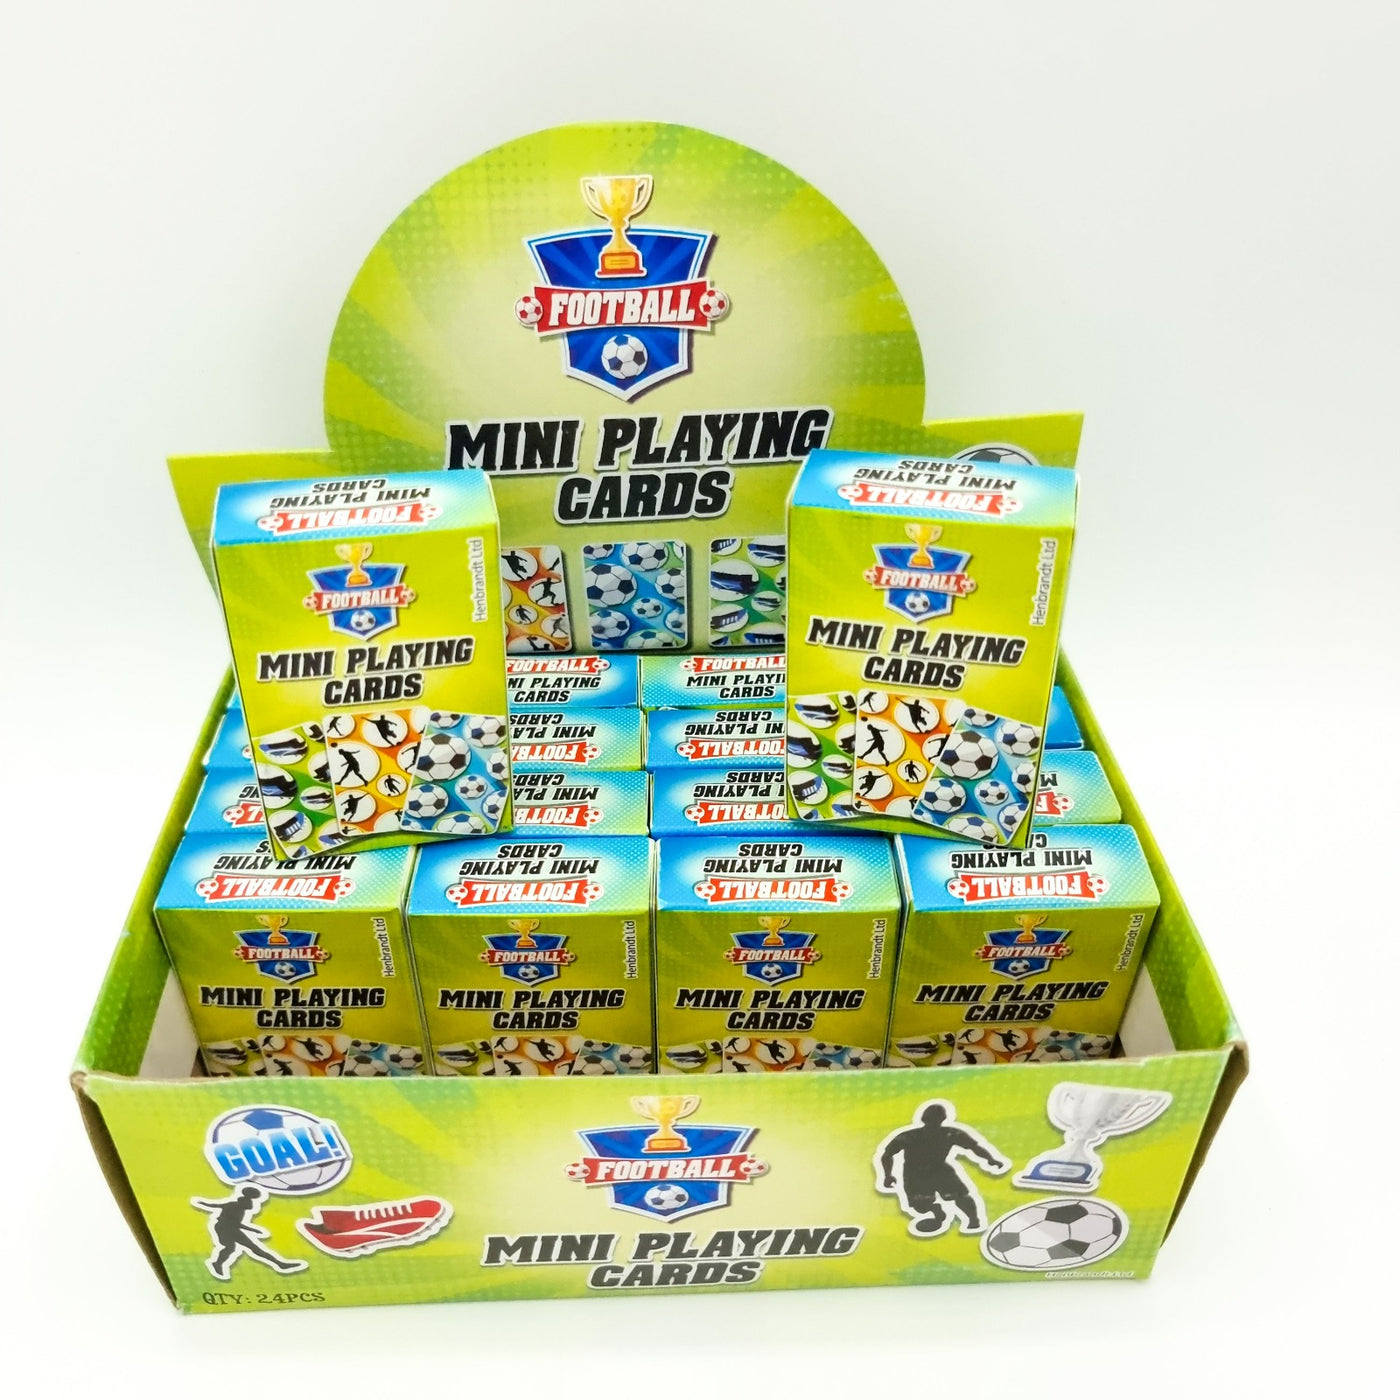 Pre-filled Football Birthday Party, Favours Goodie Bags With Sweets And Toys For Children.